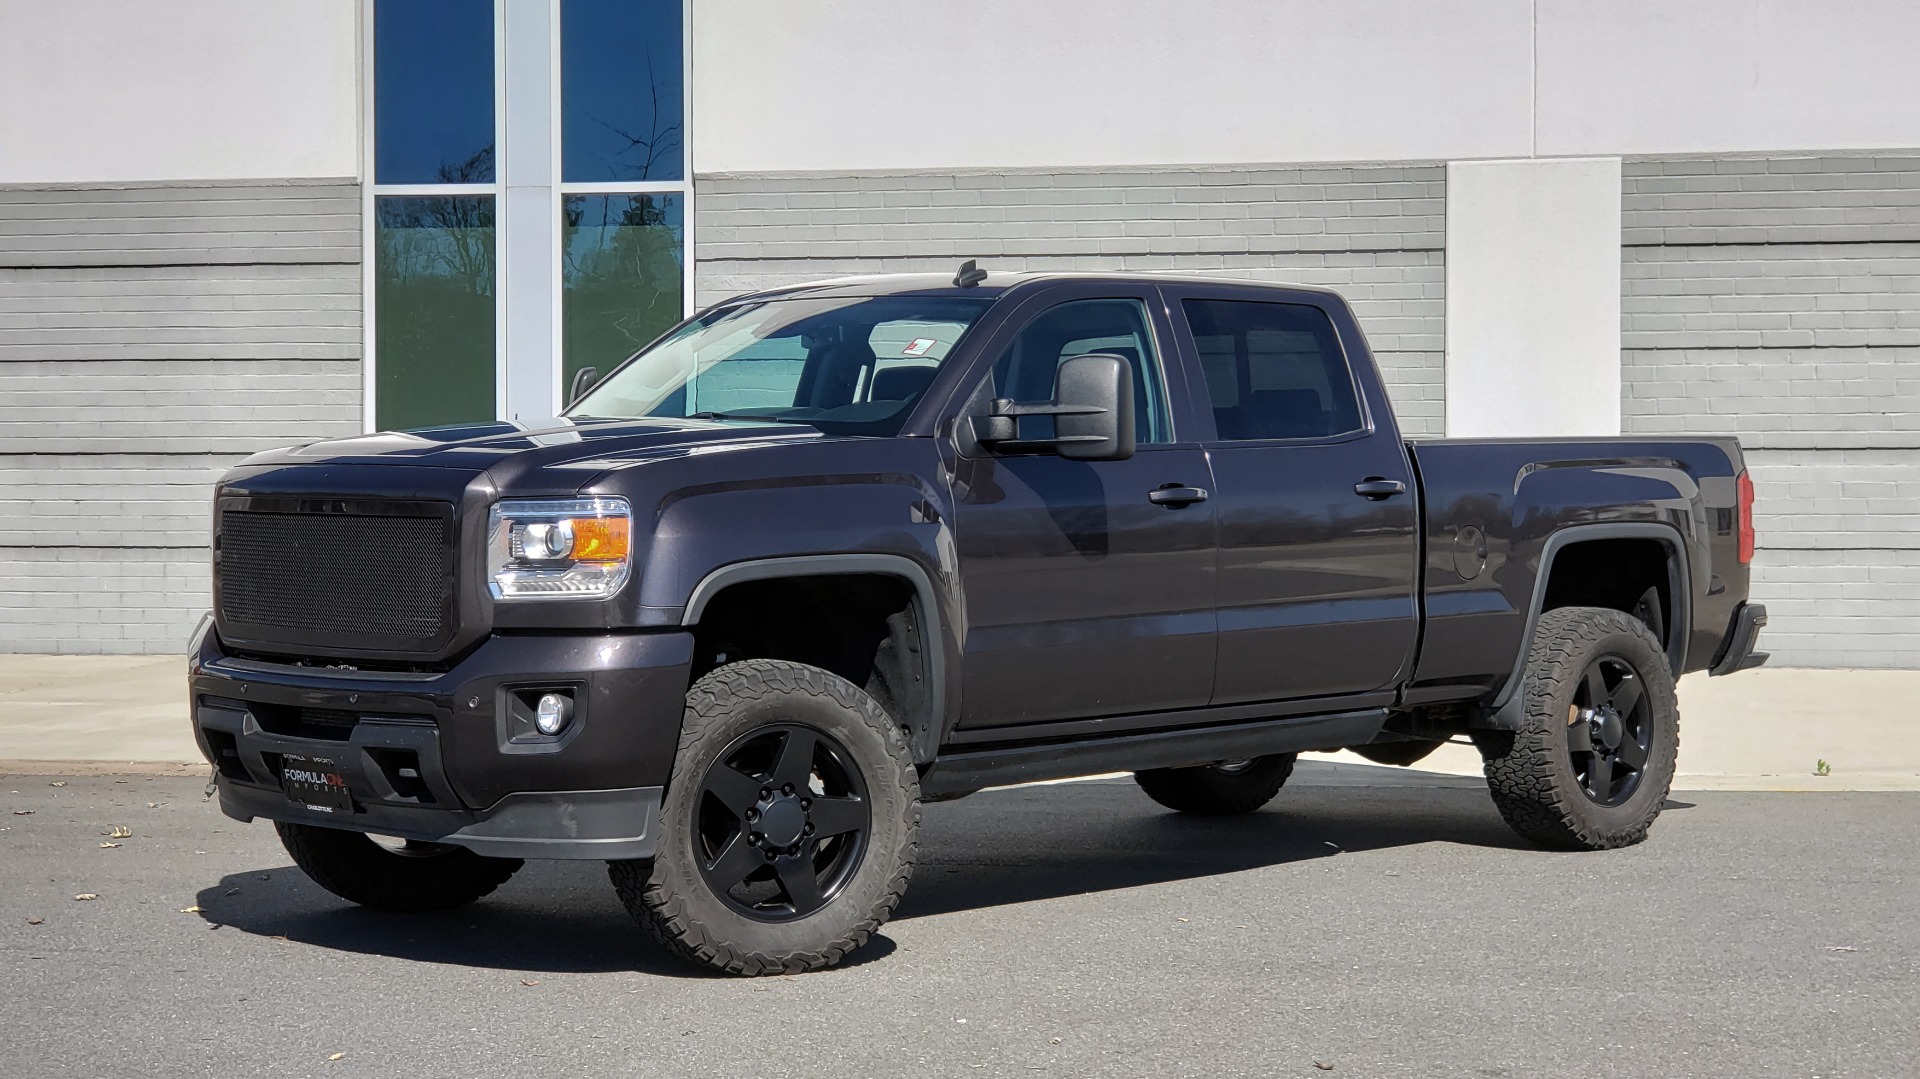 Used 2015 GMC SIERRA 2500HD DENALI 4WD CREWCAB / 6.6L DURAMAX / 6-SPD AUTO / NAV / BOSE for sale Sold at Formula Imports in Charlotte NC 28227 1